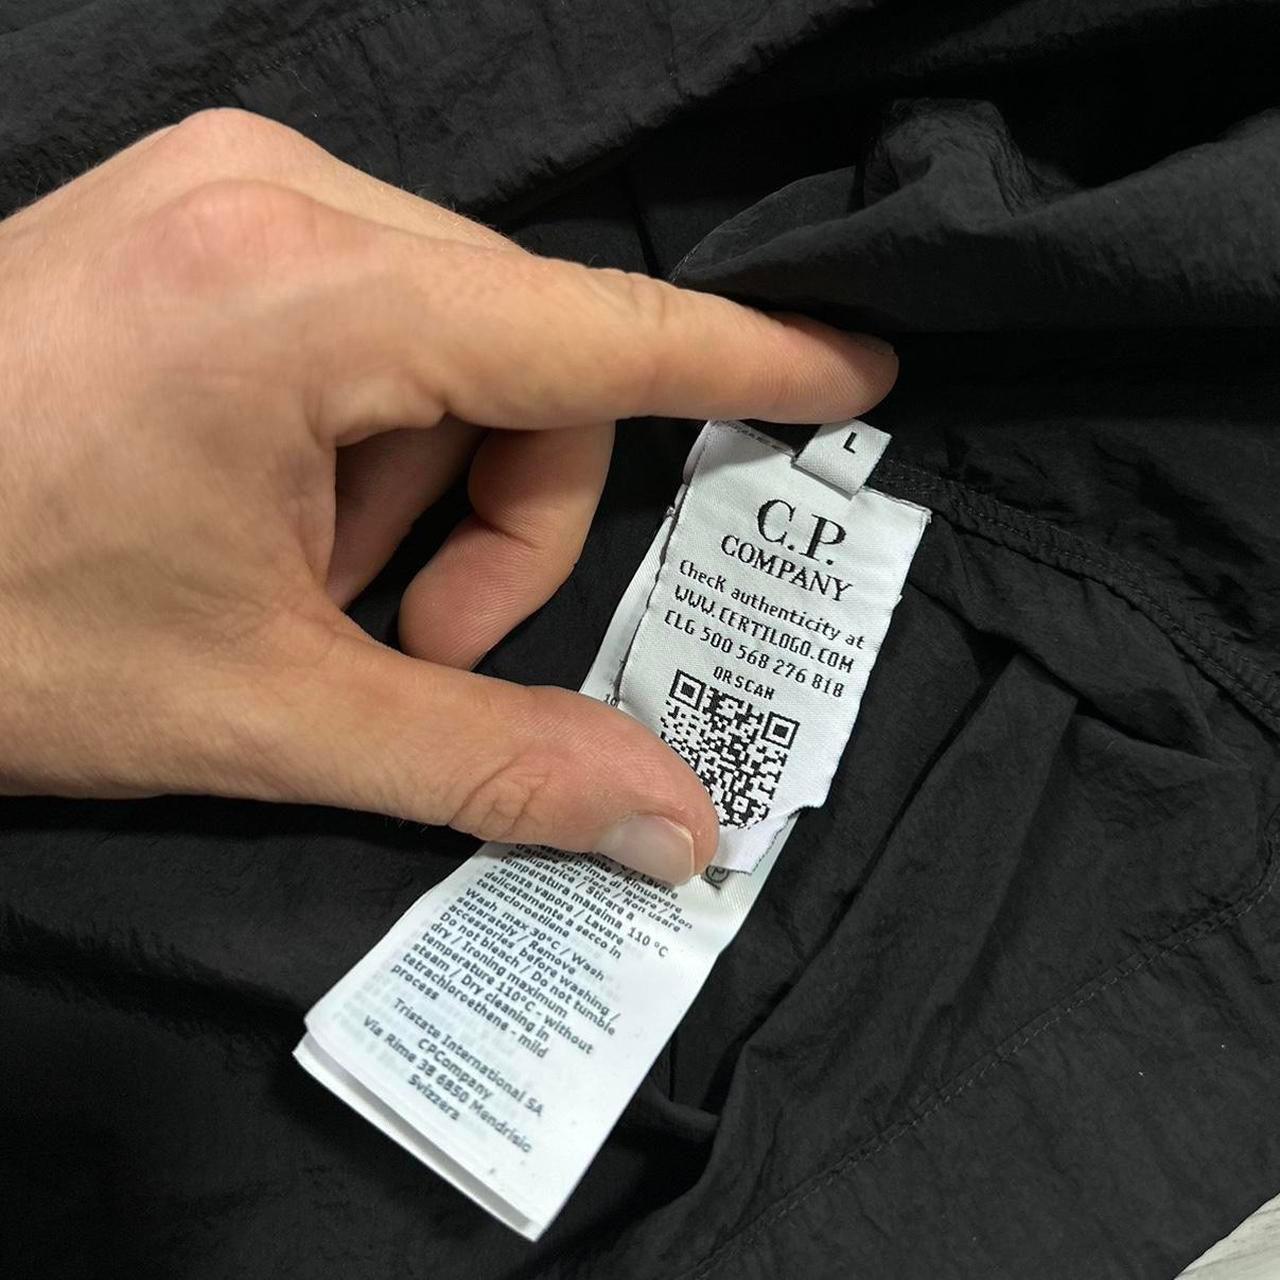 CP Company Black Nylon Lens Tracksuit - Known Source